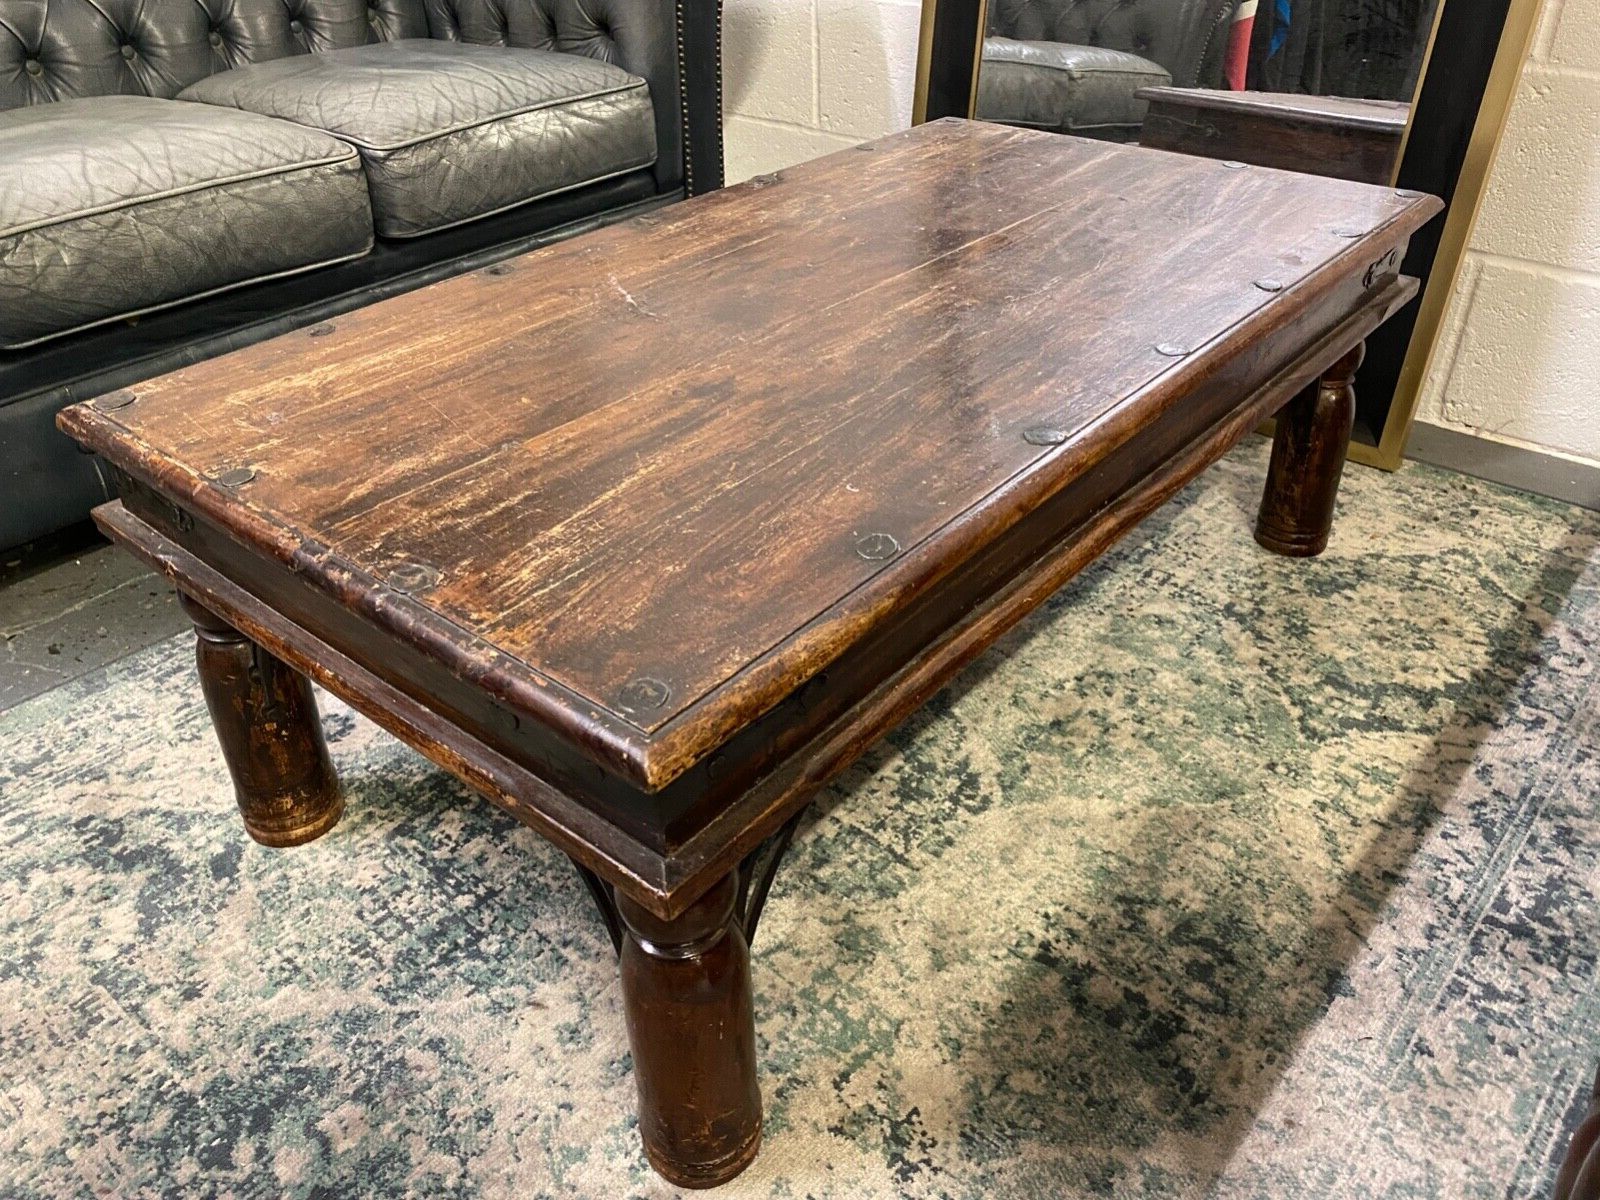 Ebay Within Well Known Reclaimed Vintage Coffee Tables (View 16 of 20)